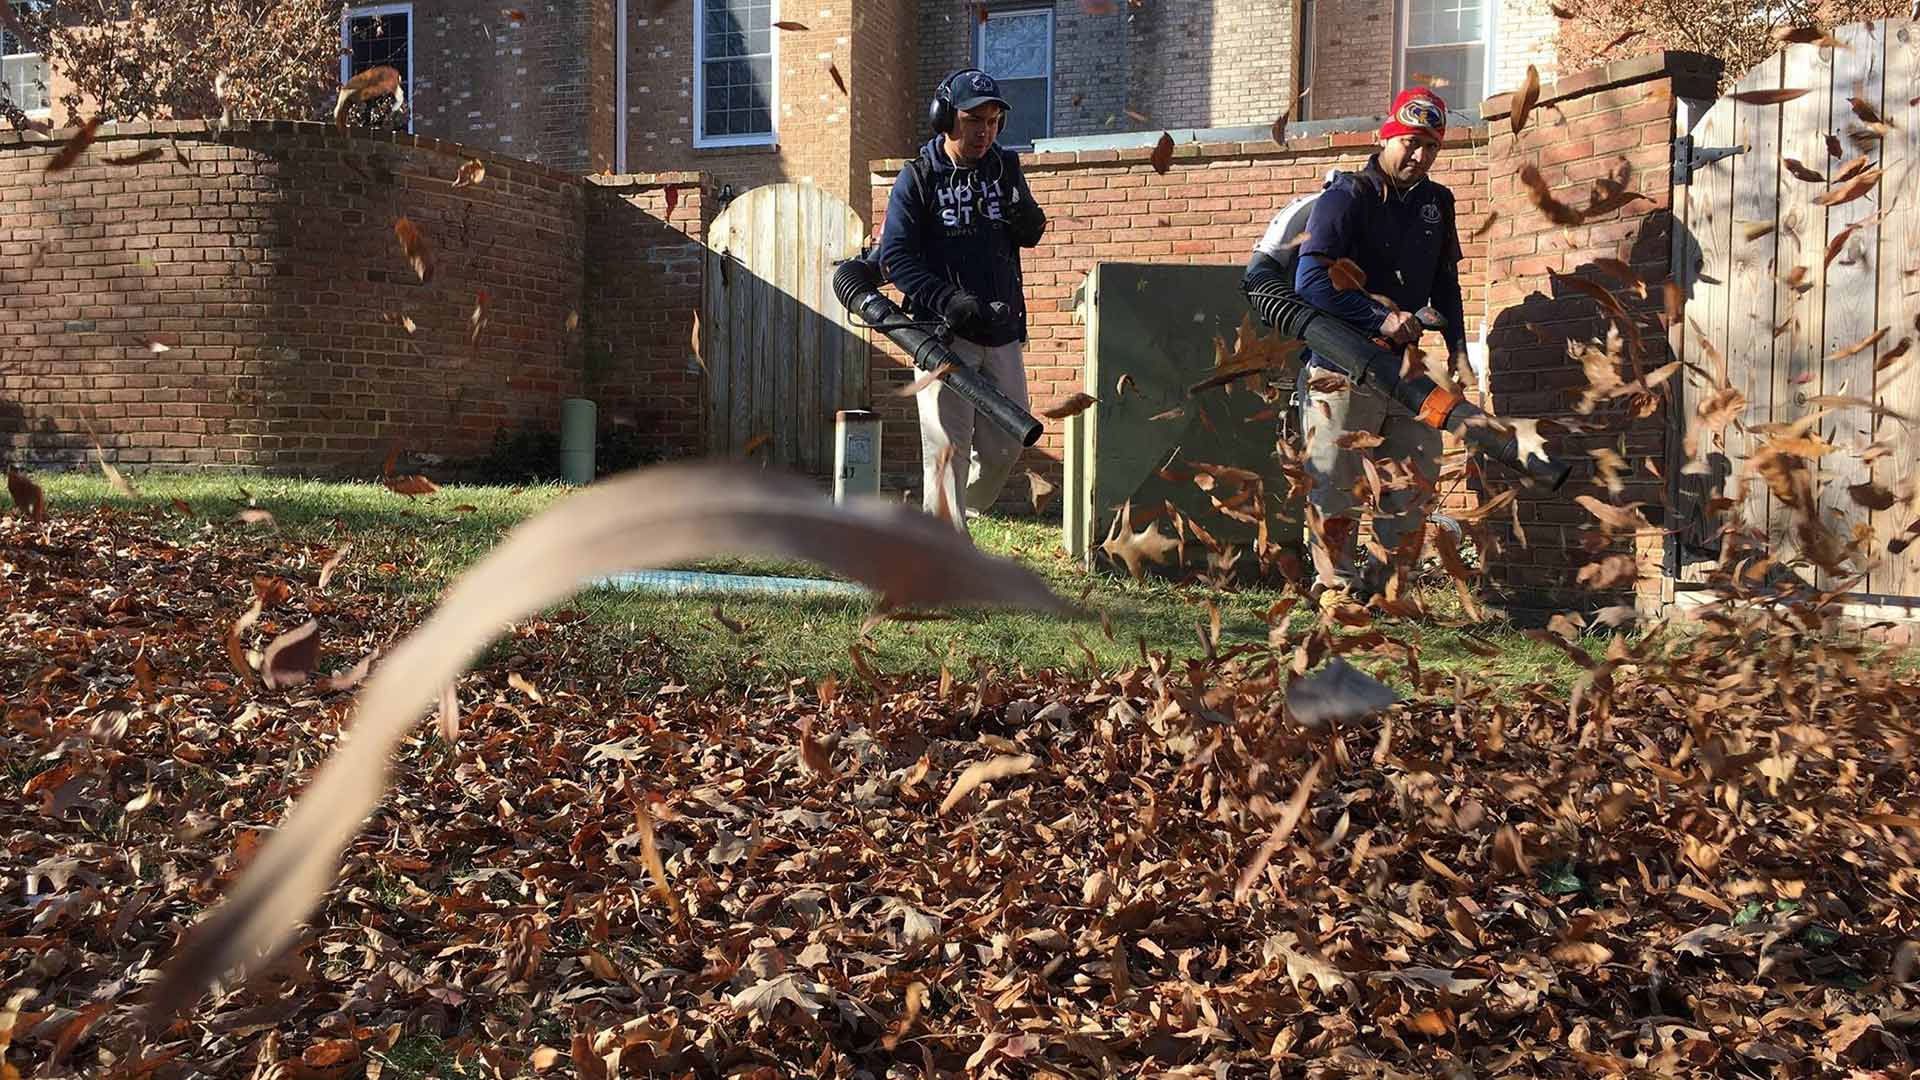 Two workers blowing leaves during a fall yard cleanup near Arlington, VA.